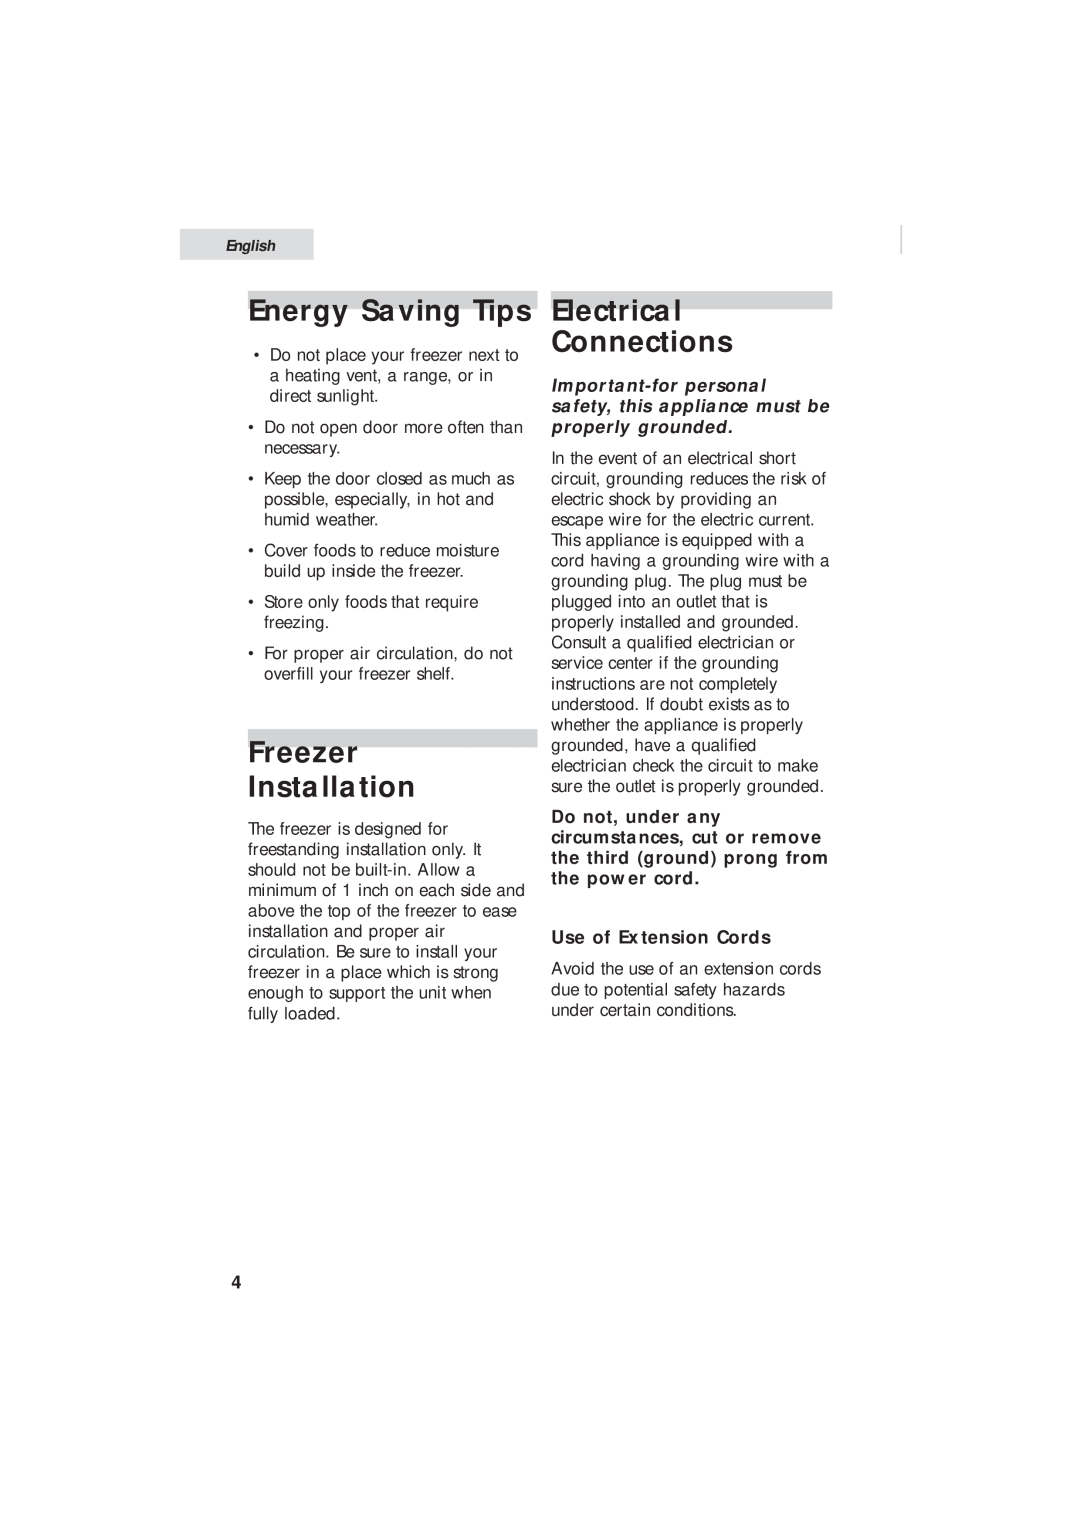 Haier HUM013EA Energy Saving Tips, Electrical, Connections, Freezer, Installation, Important-forpersonal, the power cord 